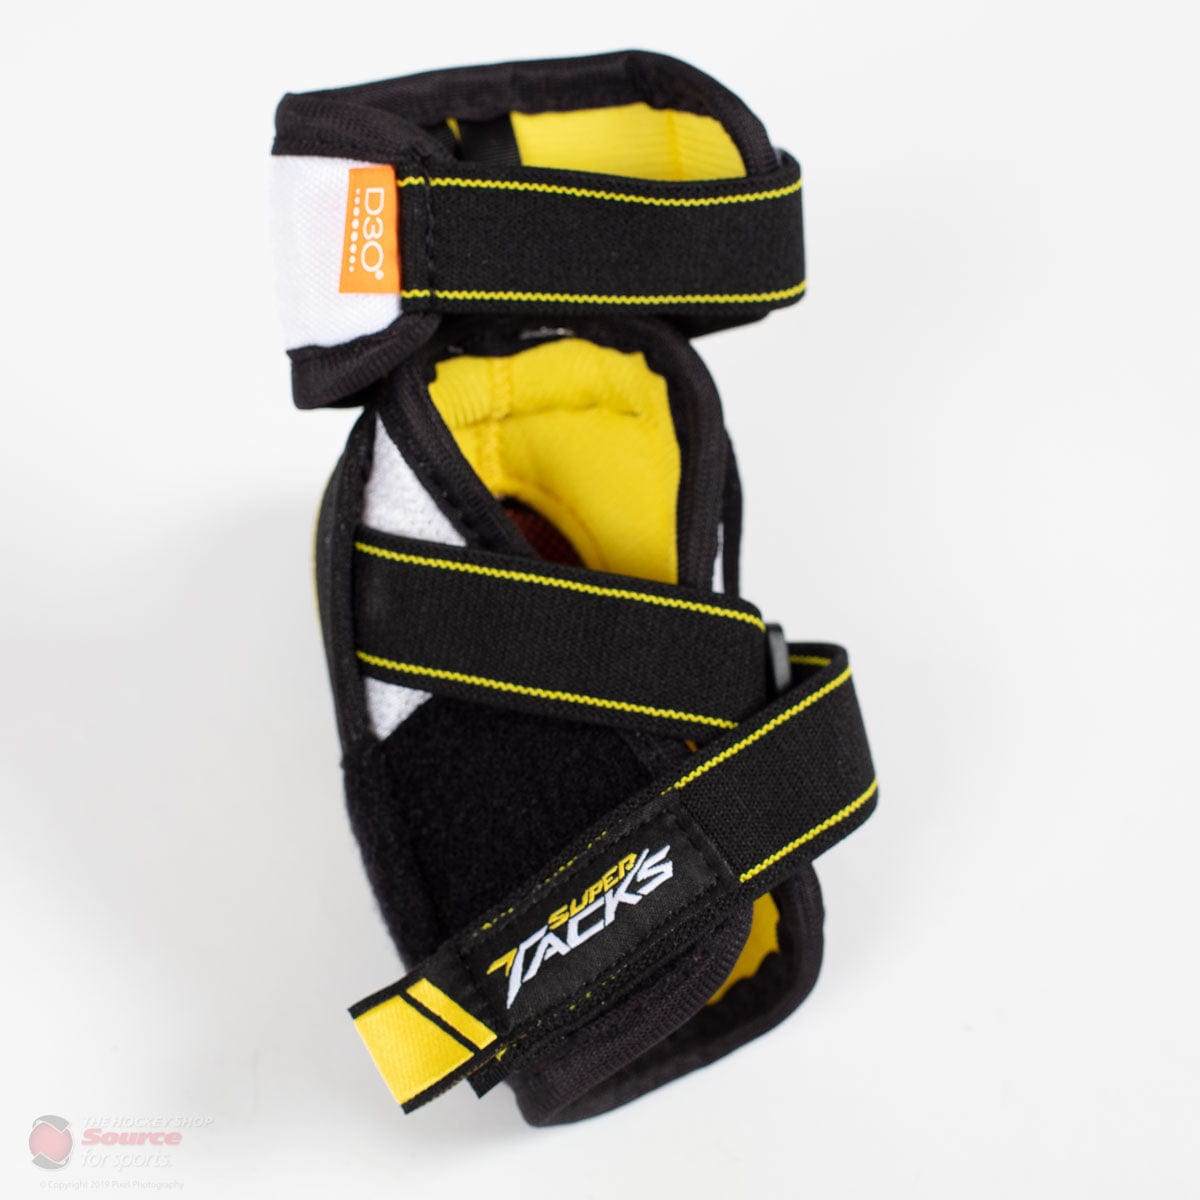 CCM Super Tacks AS1 Youth Hockey Elbow Pads